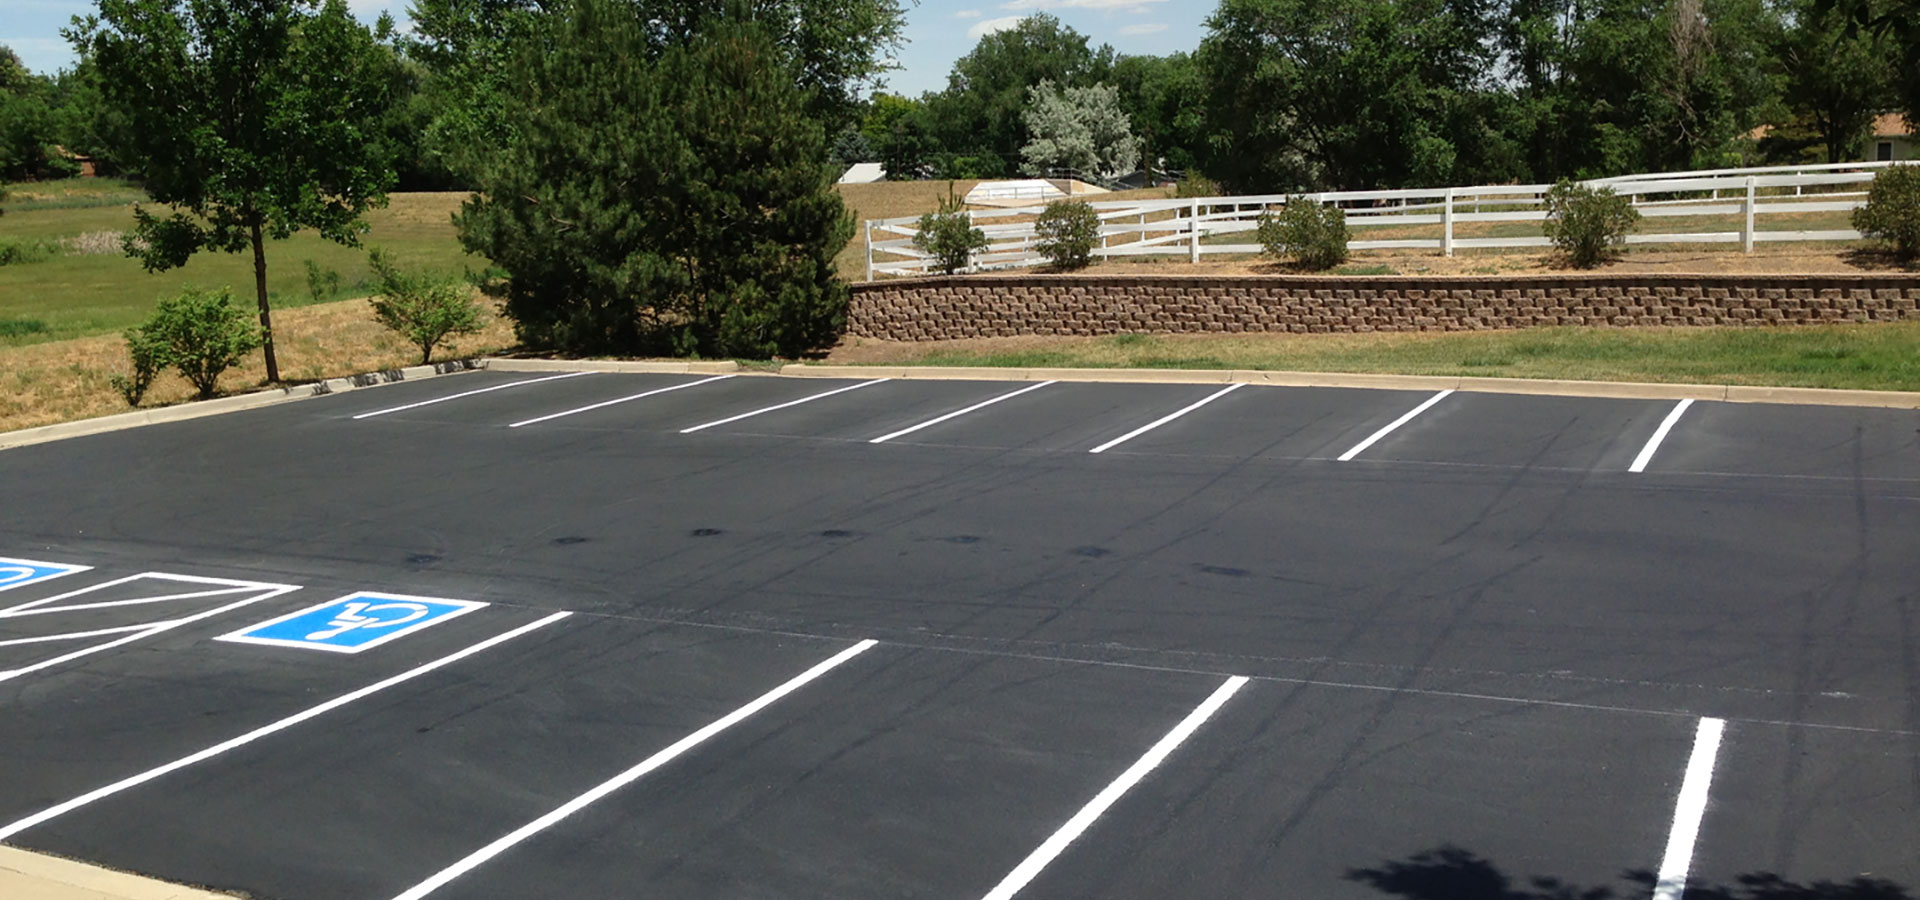 2 Reasons To Turn to This Company in IL for Parking Management Services